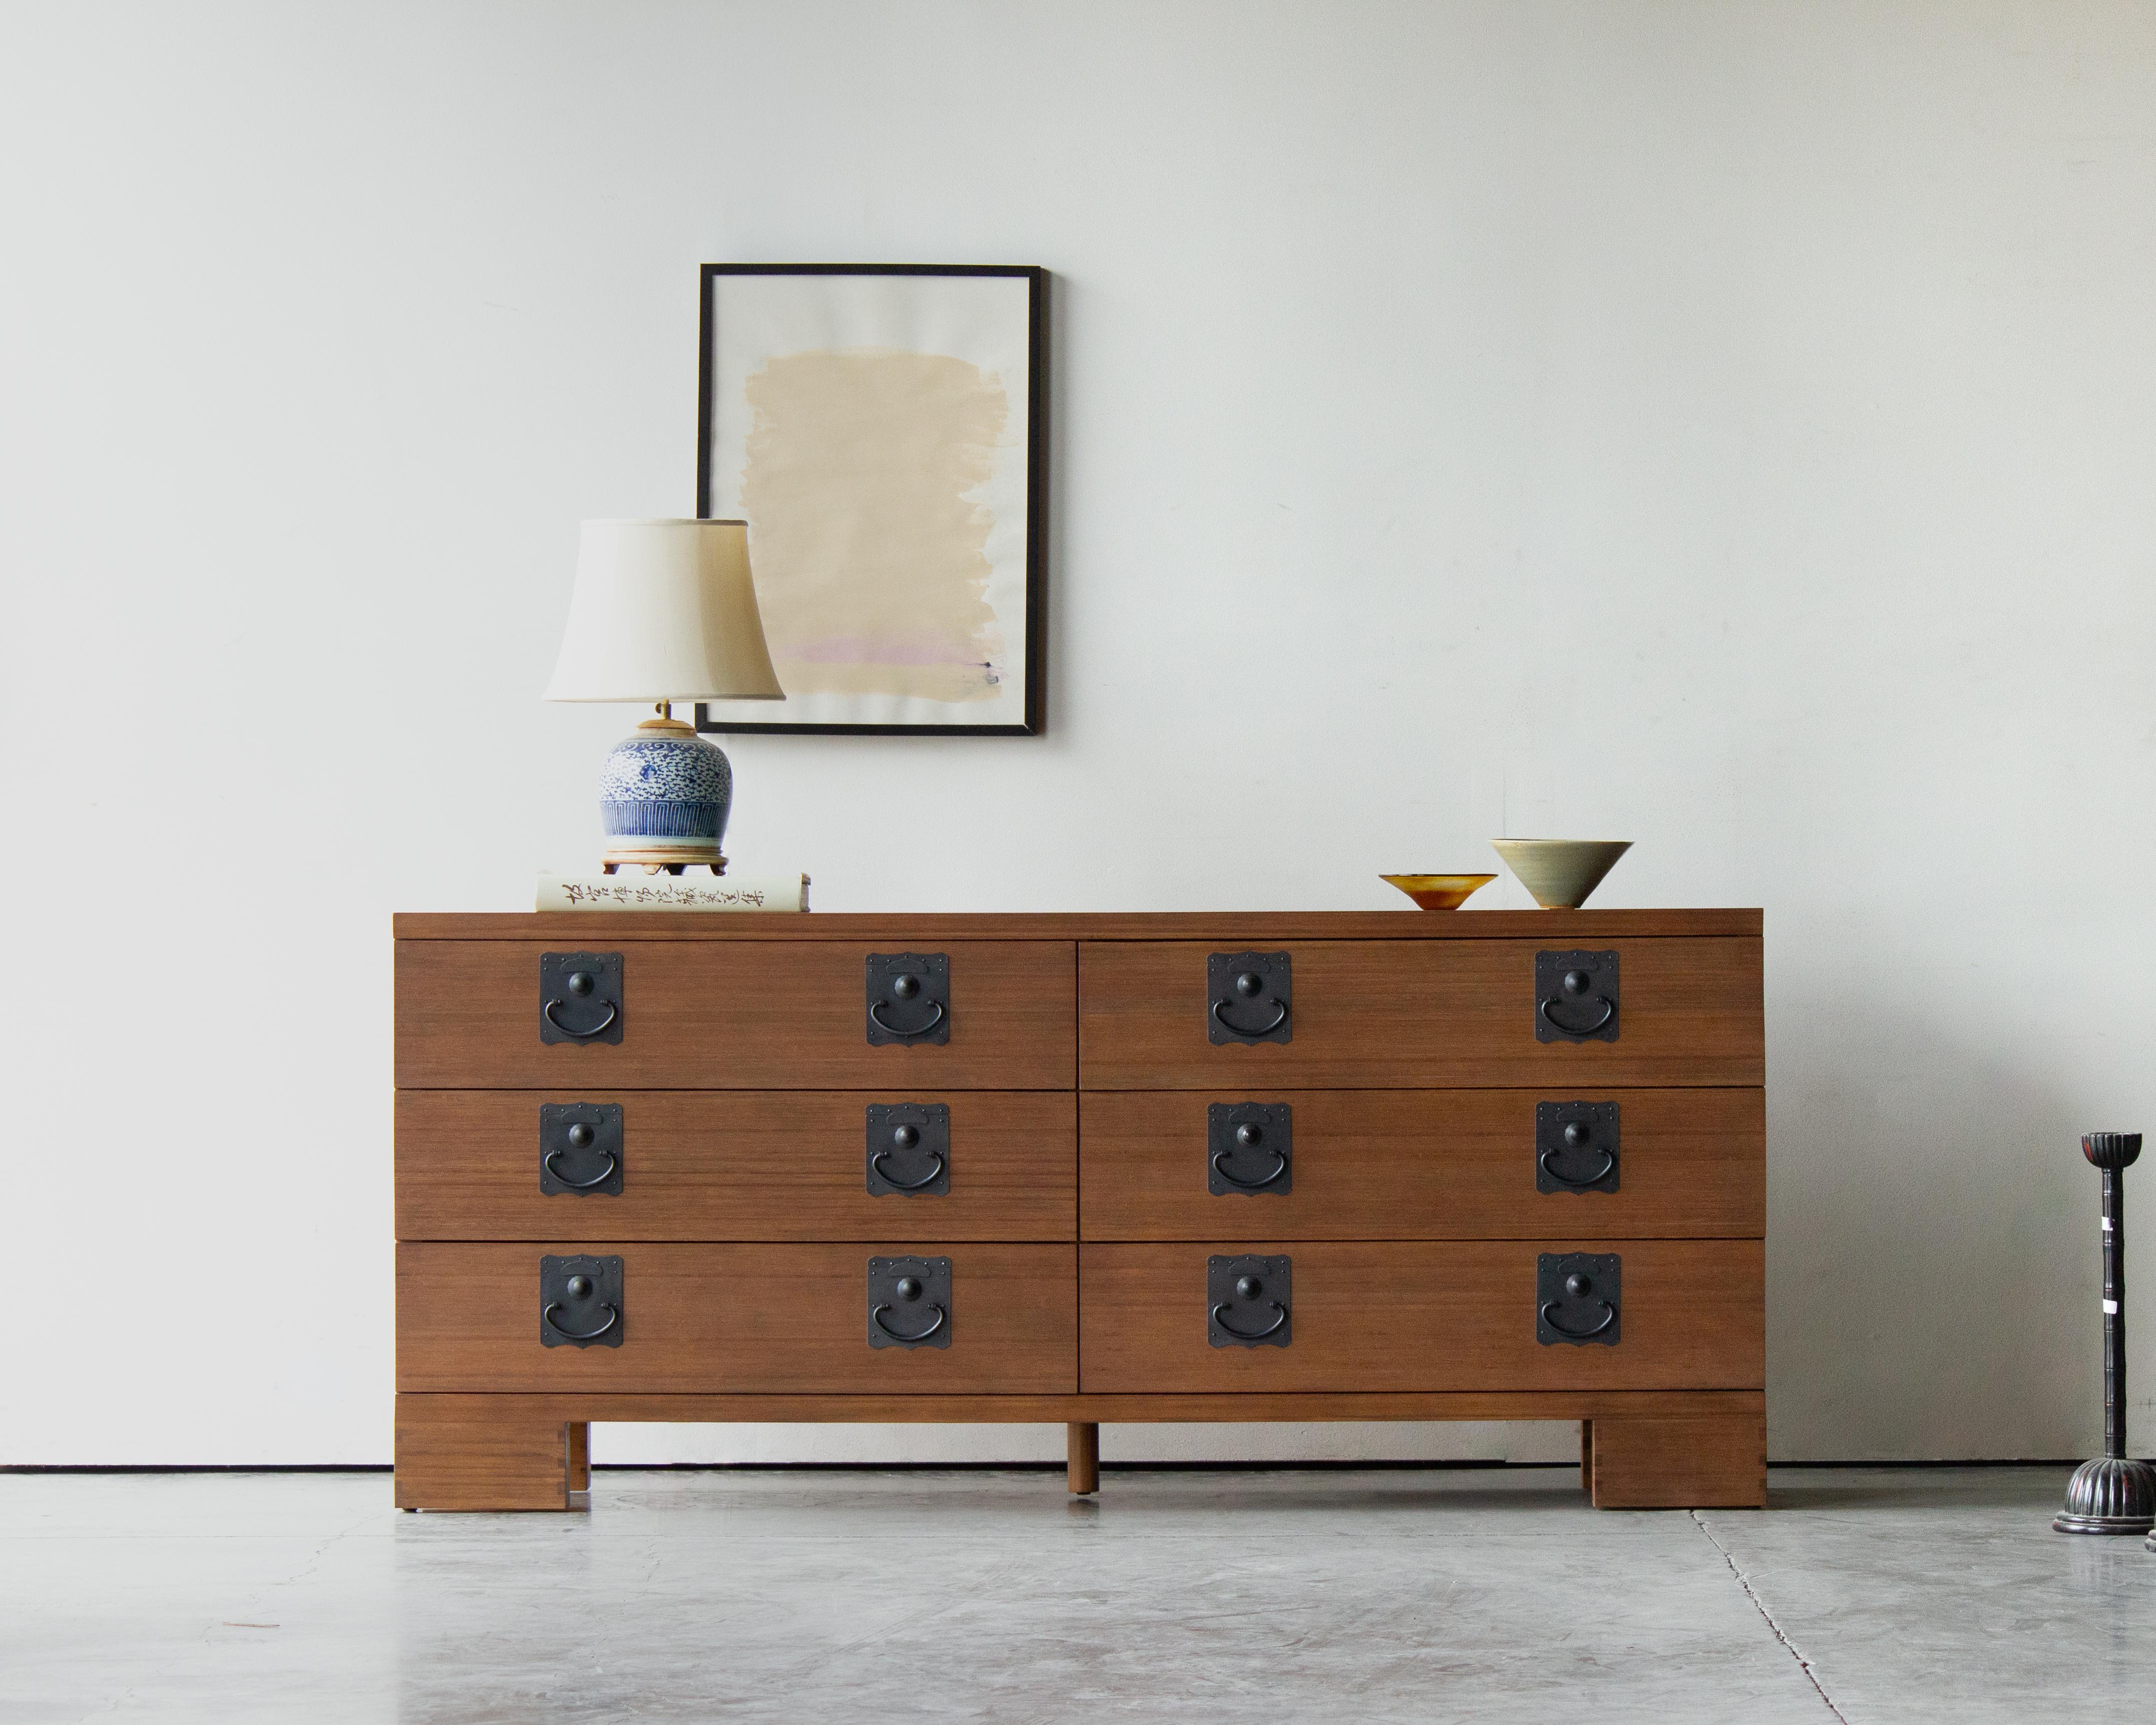 The Fen Dresser marries the exquisite intricacy of traditional Tansu-style metal pulls with a decidedly modern silhouette. It beautifully illustrates the history of Maria Yee, uniting our roots in classical Chinese and Japanese furniture to the